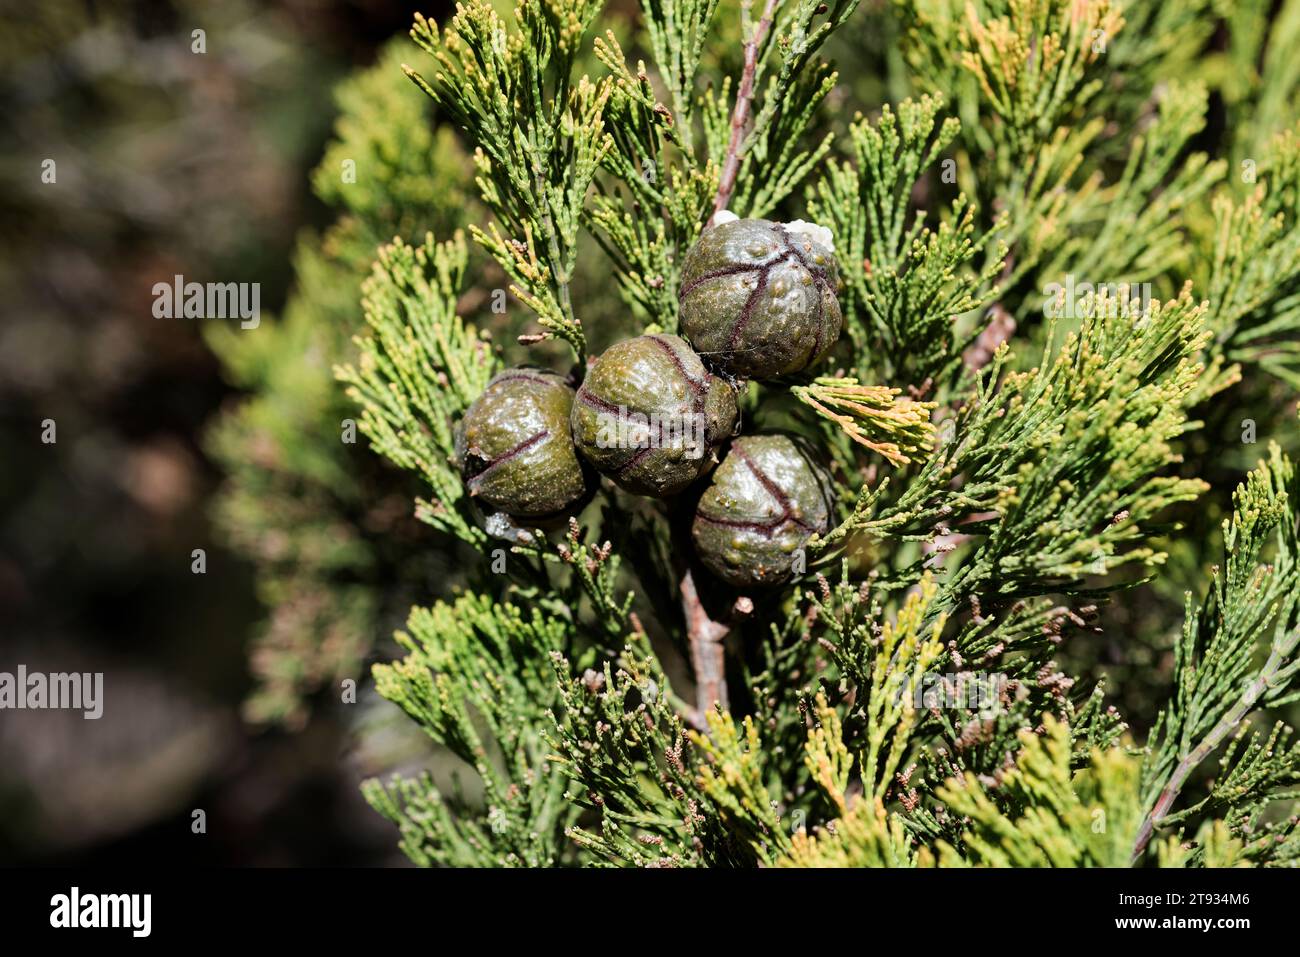 Rottnest Island pine or southern cypress pine (Callitris preissii) is a cypress endemic to Australia. Cones and needle-like leaves detail. Stock Photo